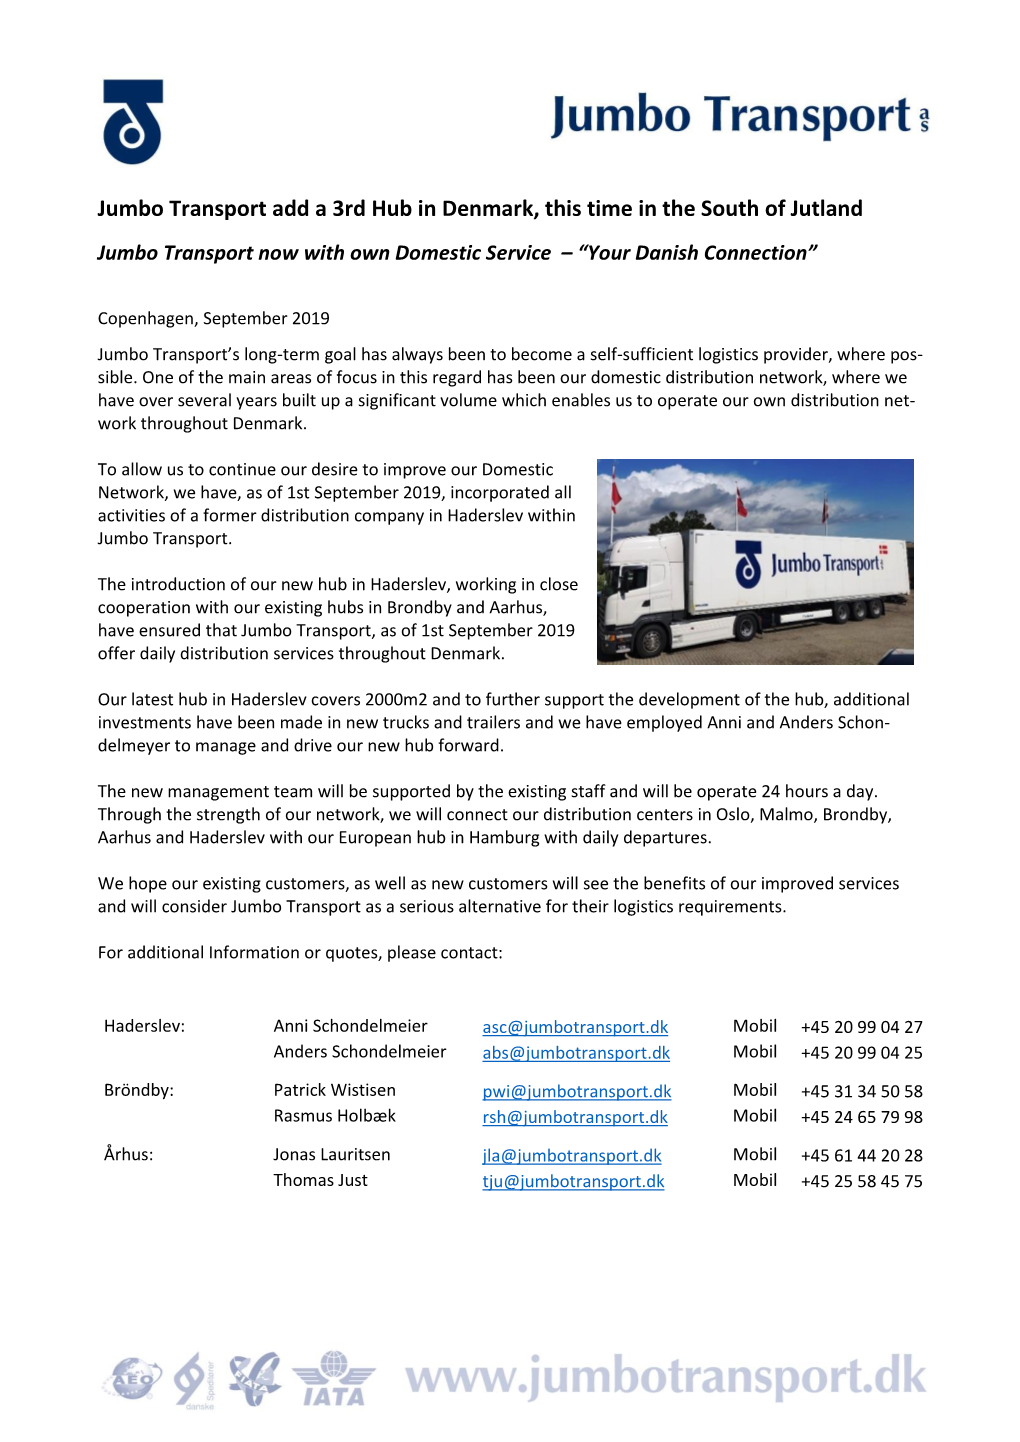 Jumbo Transport Add a 3Rd Hub in Denmark, This Time in the South of Jutland Jumbo Transport Now with Own Domestic Service – “Your Danish Connection”